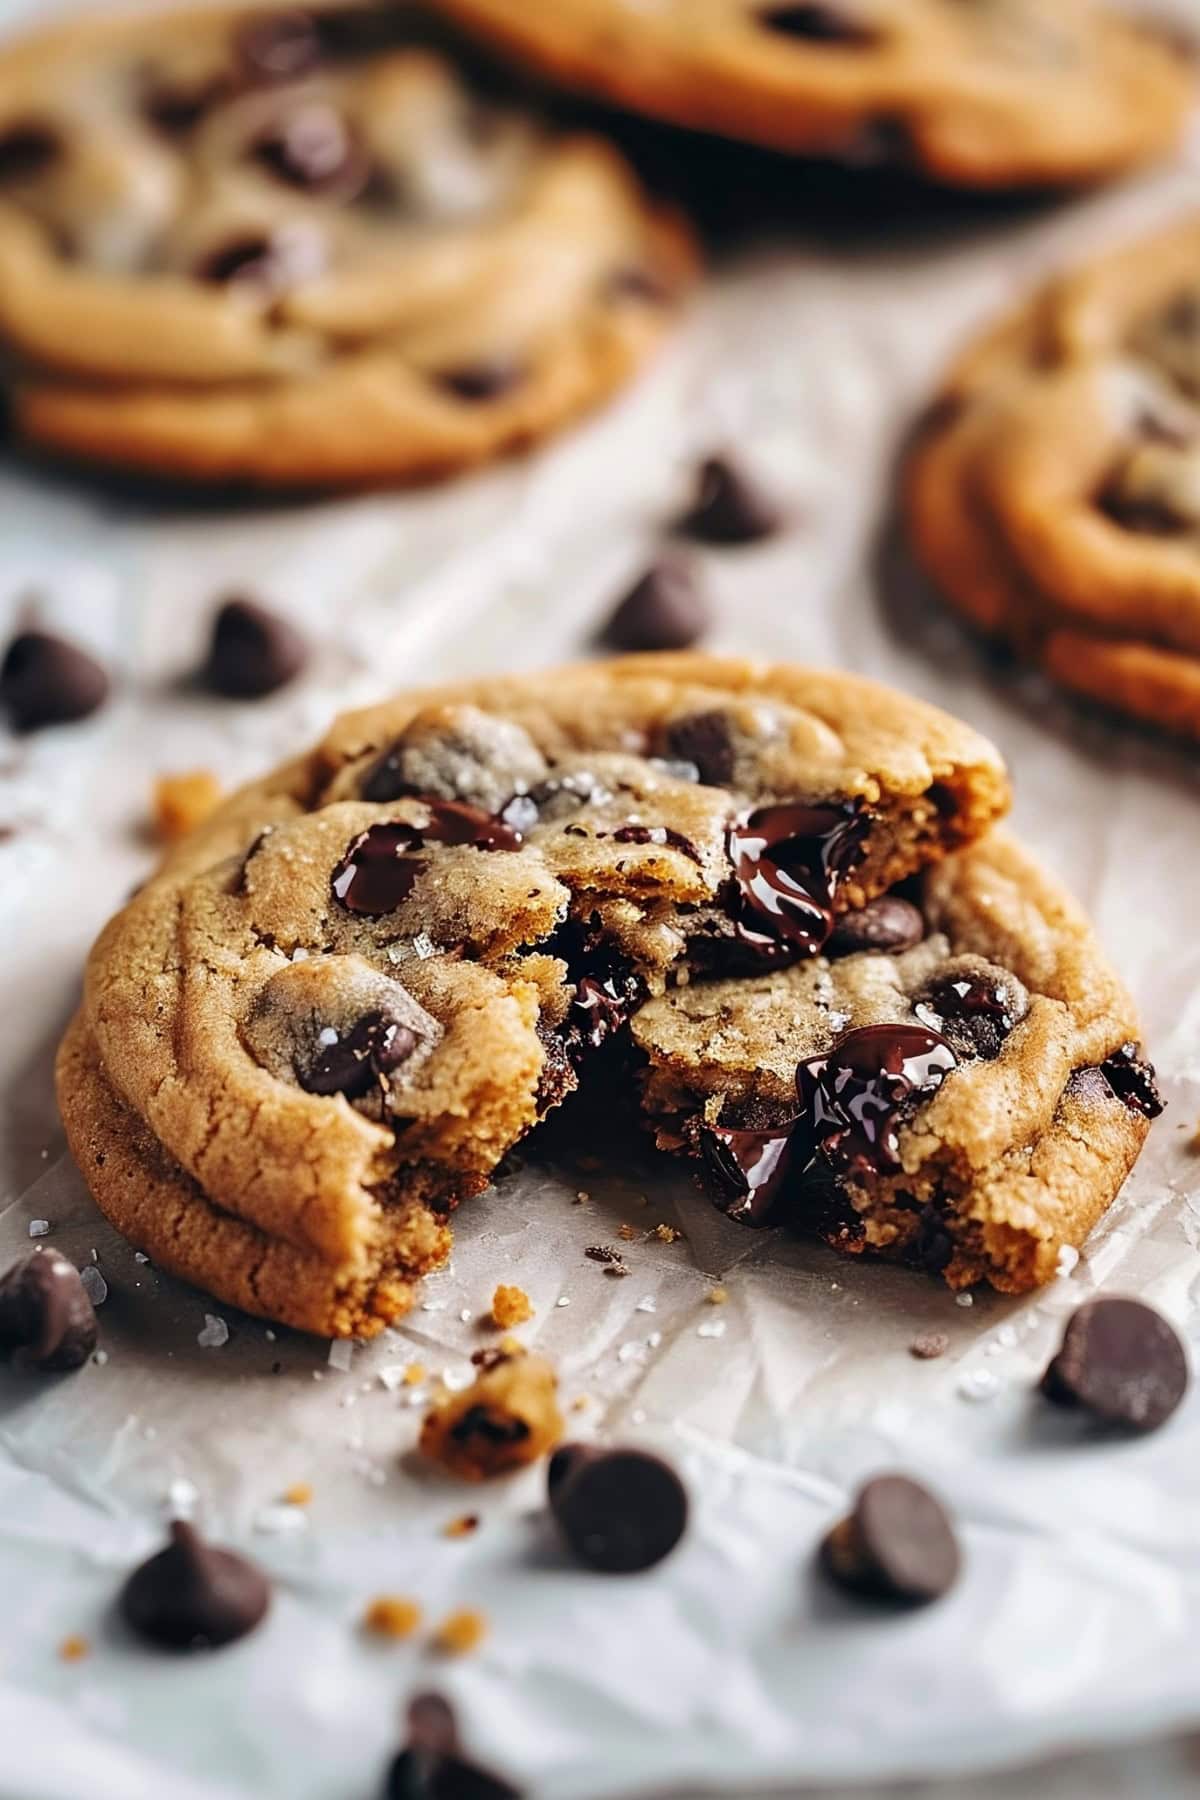 Two Halves of a Brown Butter Chocolate Chip Cookie Resting on Each Other with More Cookies and Chocolate Chips in the Background